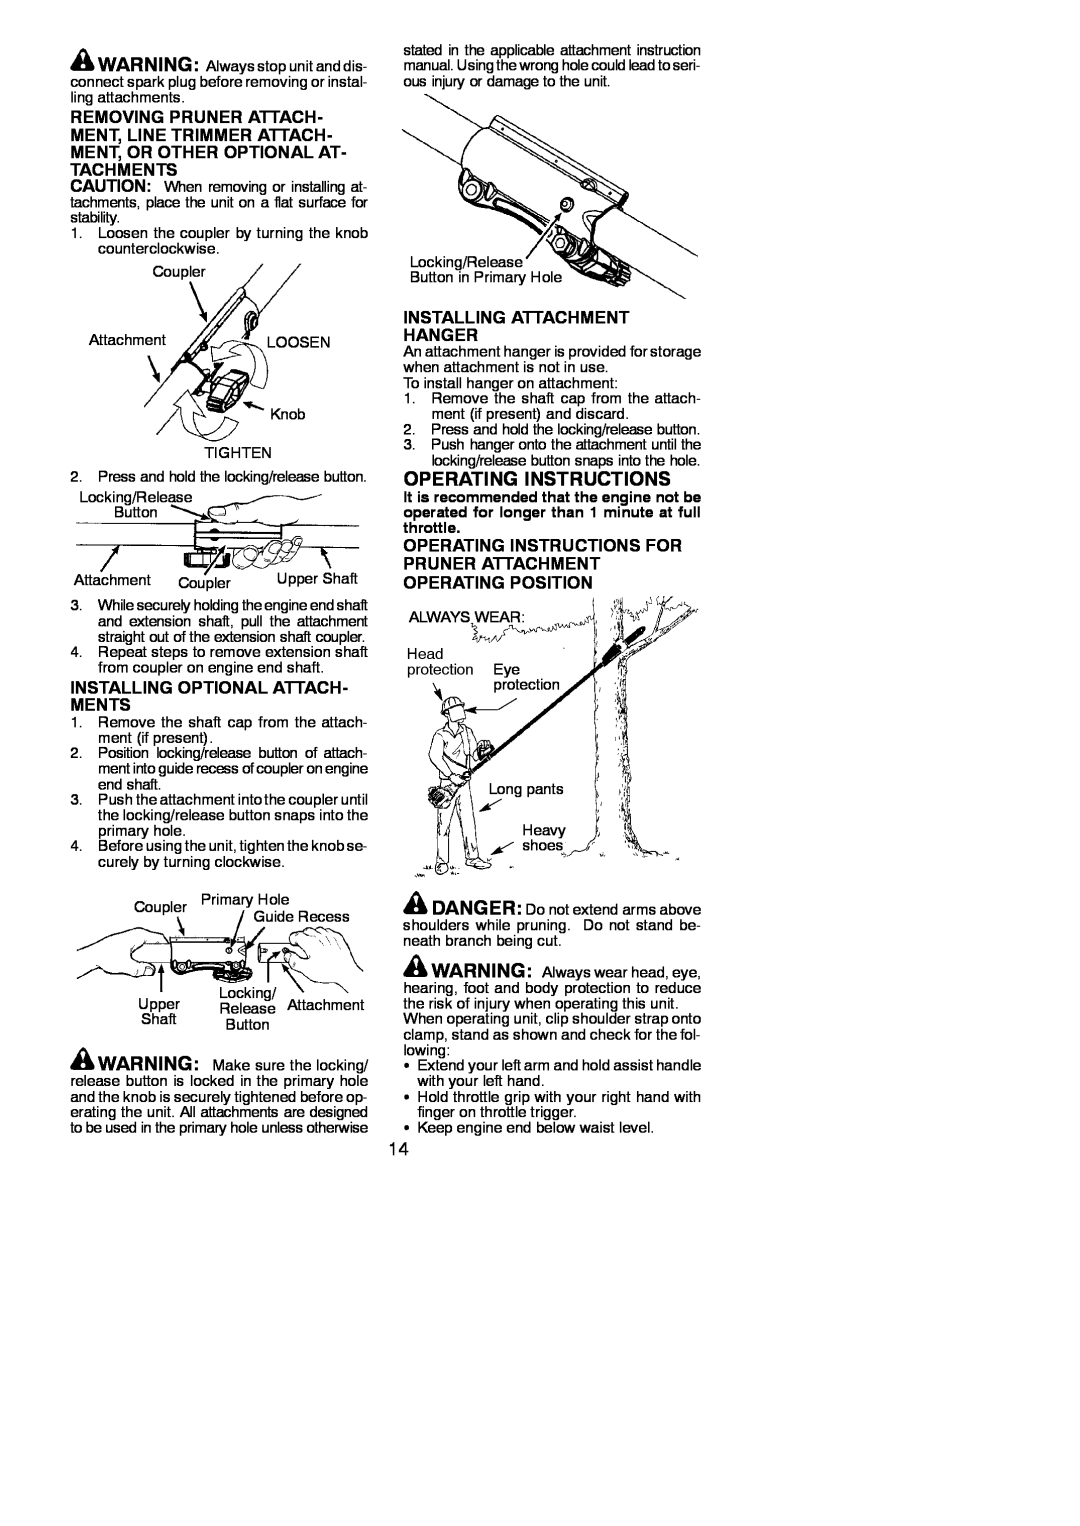 Poulan 966423701, 115244926 Operating Instructions, Removing Pruner Attach, Installing Optional Attach- Ments 